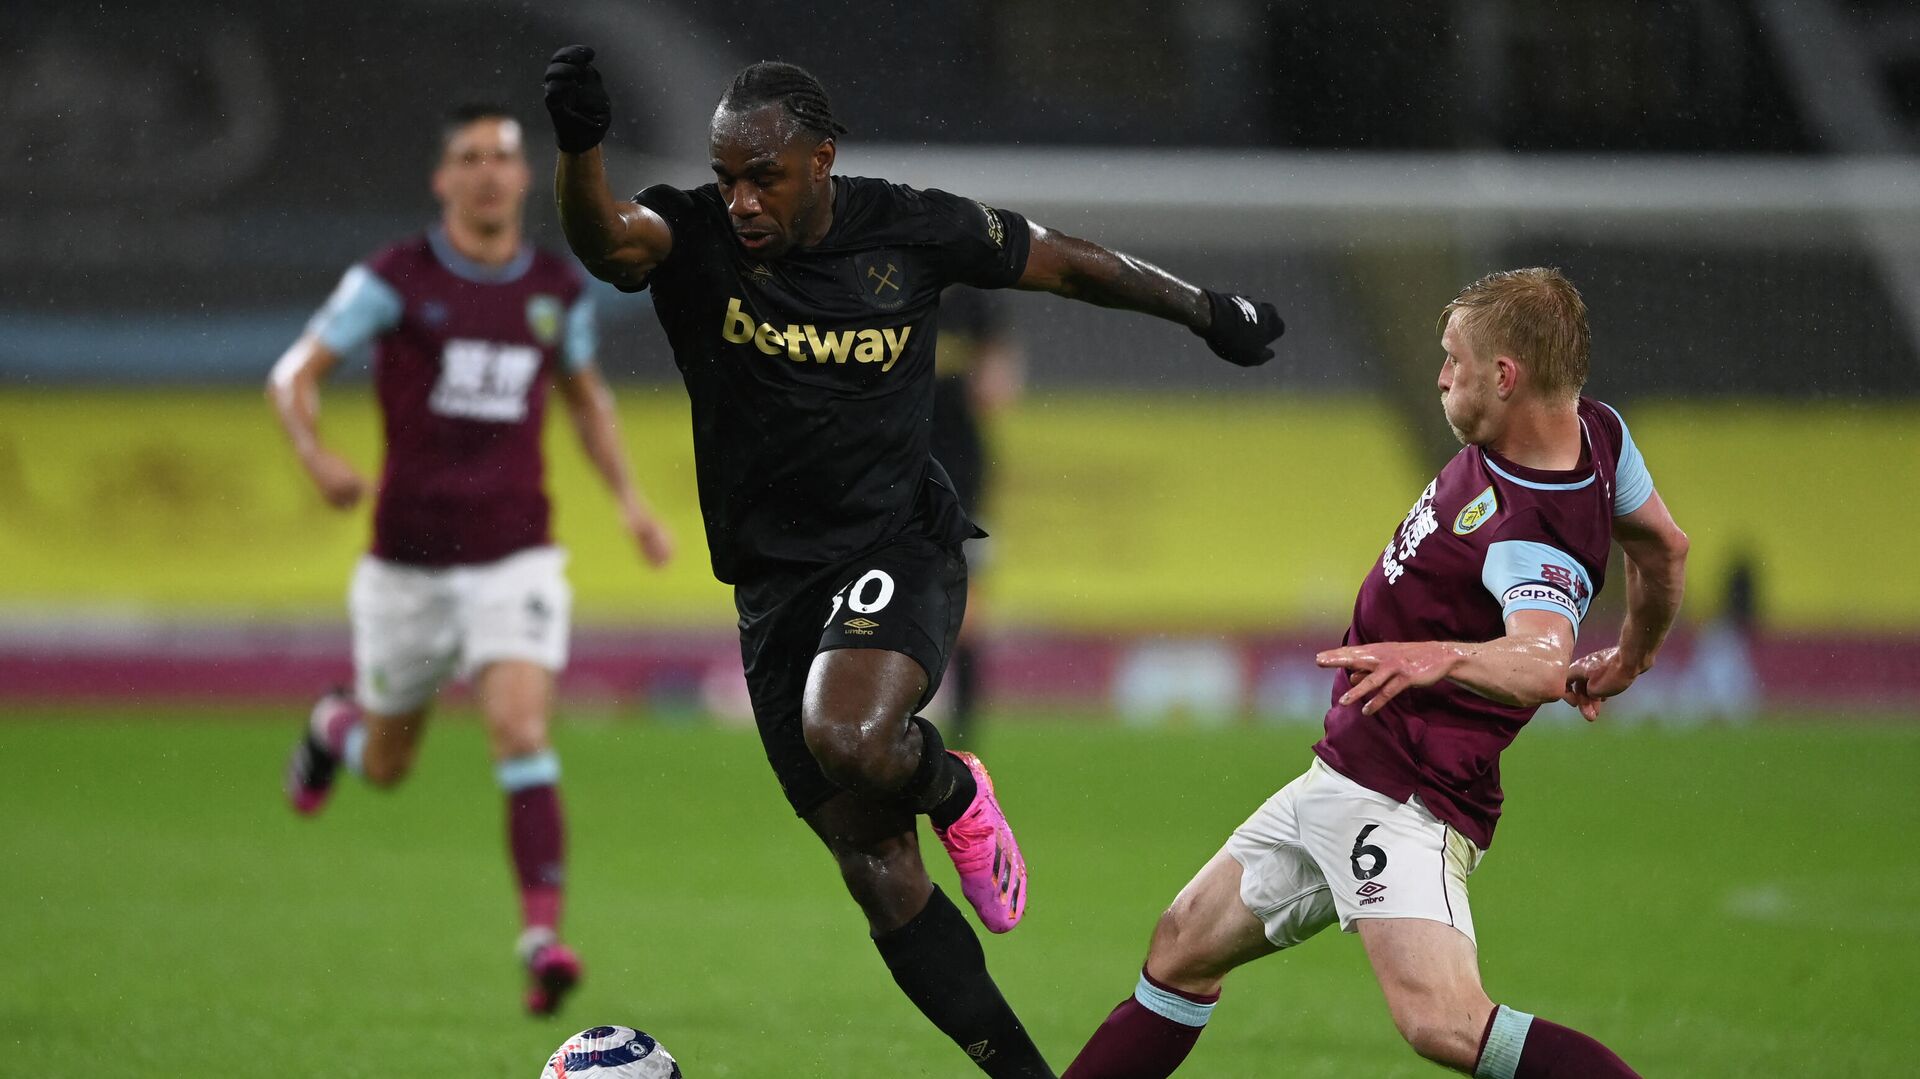 West Ham United's English midfielder Michail Antonio (C) avoids the tackle of Burnley's English defender Ben Mee during the English Premier League football match between Burnley and West Ham United at Turf Moor in Burnley, north west England, on May 3, 2021. (Photo by GARETH COPLEY / POOL / AFP) / RESTRICTED TO EDITORIAL USE. No use with unauthorized audio, video, data, fixture lists, club/league logos or 'live' services. Online in-match use limited to 120 images. An additional 40 images may be used in extra time. No video emulation. Social media in-match use limited to 120 images. An additional 40 images may be used in extra time. No use in betting publications, games or single club/league/player publications. /  - РИА Новости, 1920, 04.05.2021